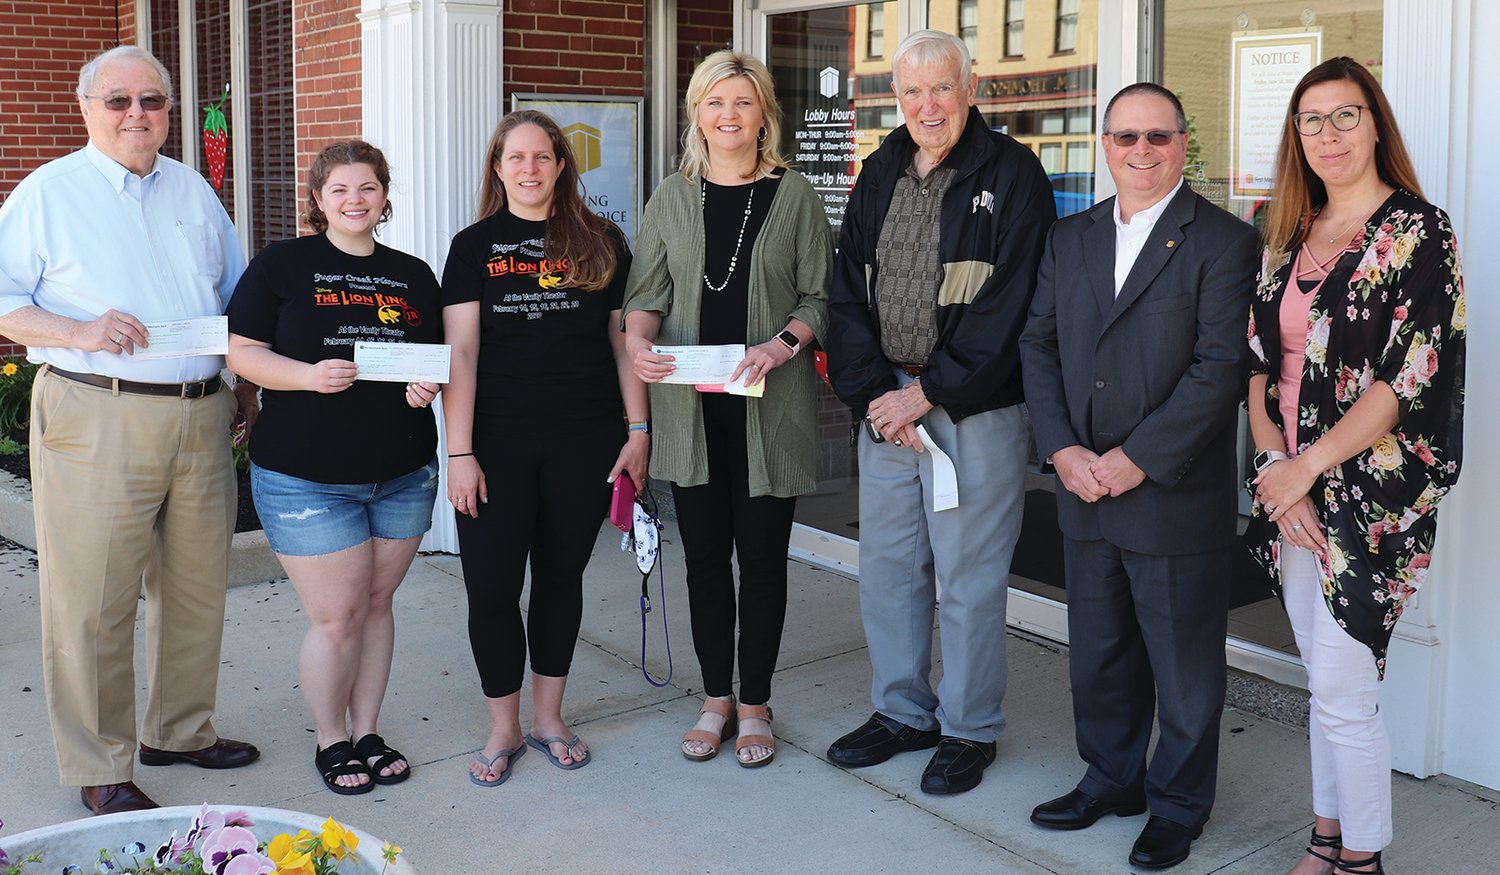 Pictured from left are Jack Wyatt, First Merchants Charitable Foundation, Jennie Swick and Lisa Warren, Vanity Theater, Kelly Taylor, Montgomery County Community Foundation, Bud Arnold, FISH Ministries, Brett Talcott, First Merchants Bank Regional President, and Ashley Rivers, First Merchants Crawfordsville Banking Center Manager.